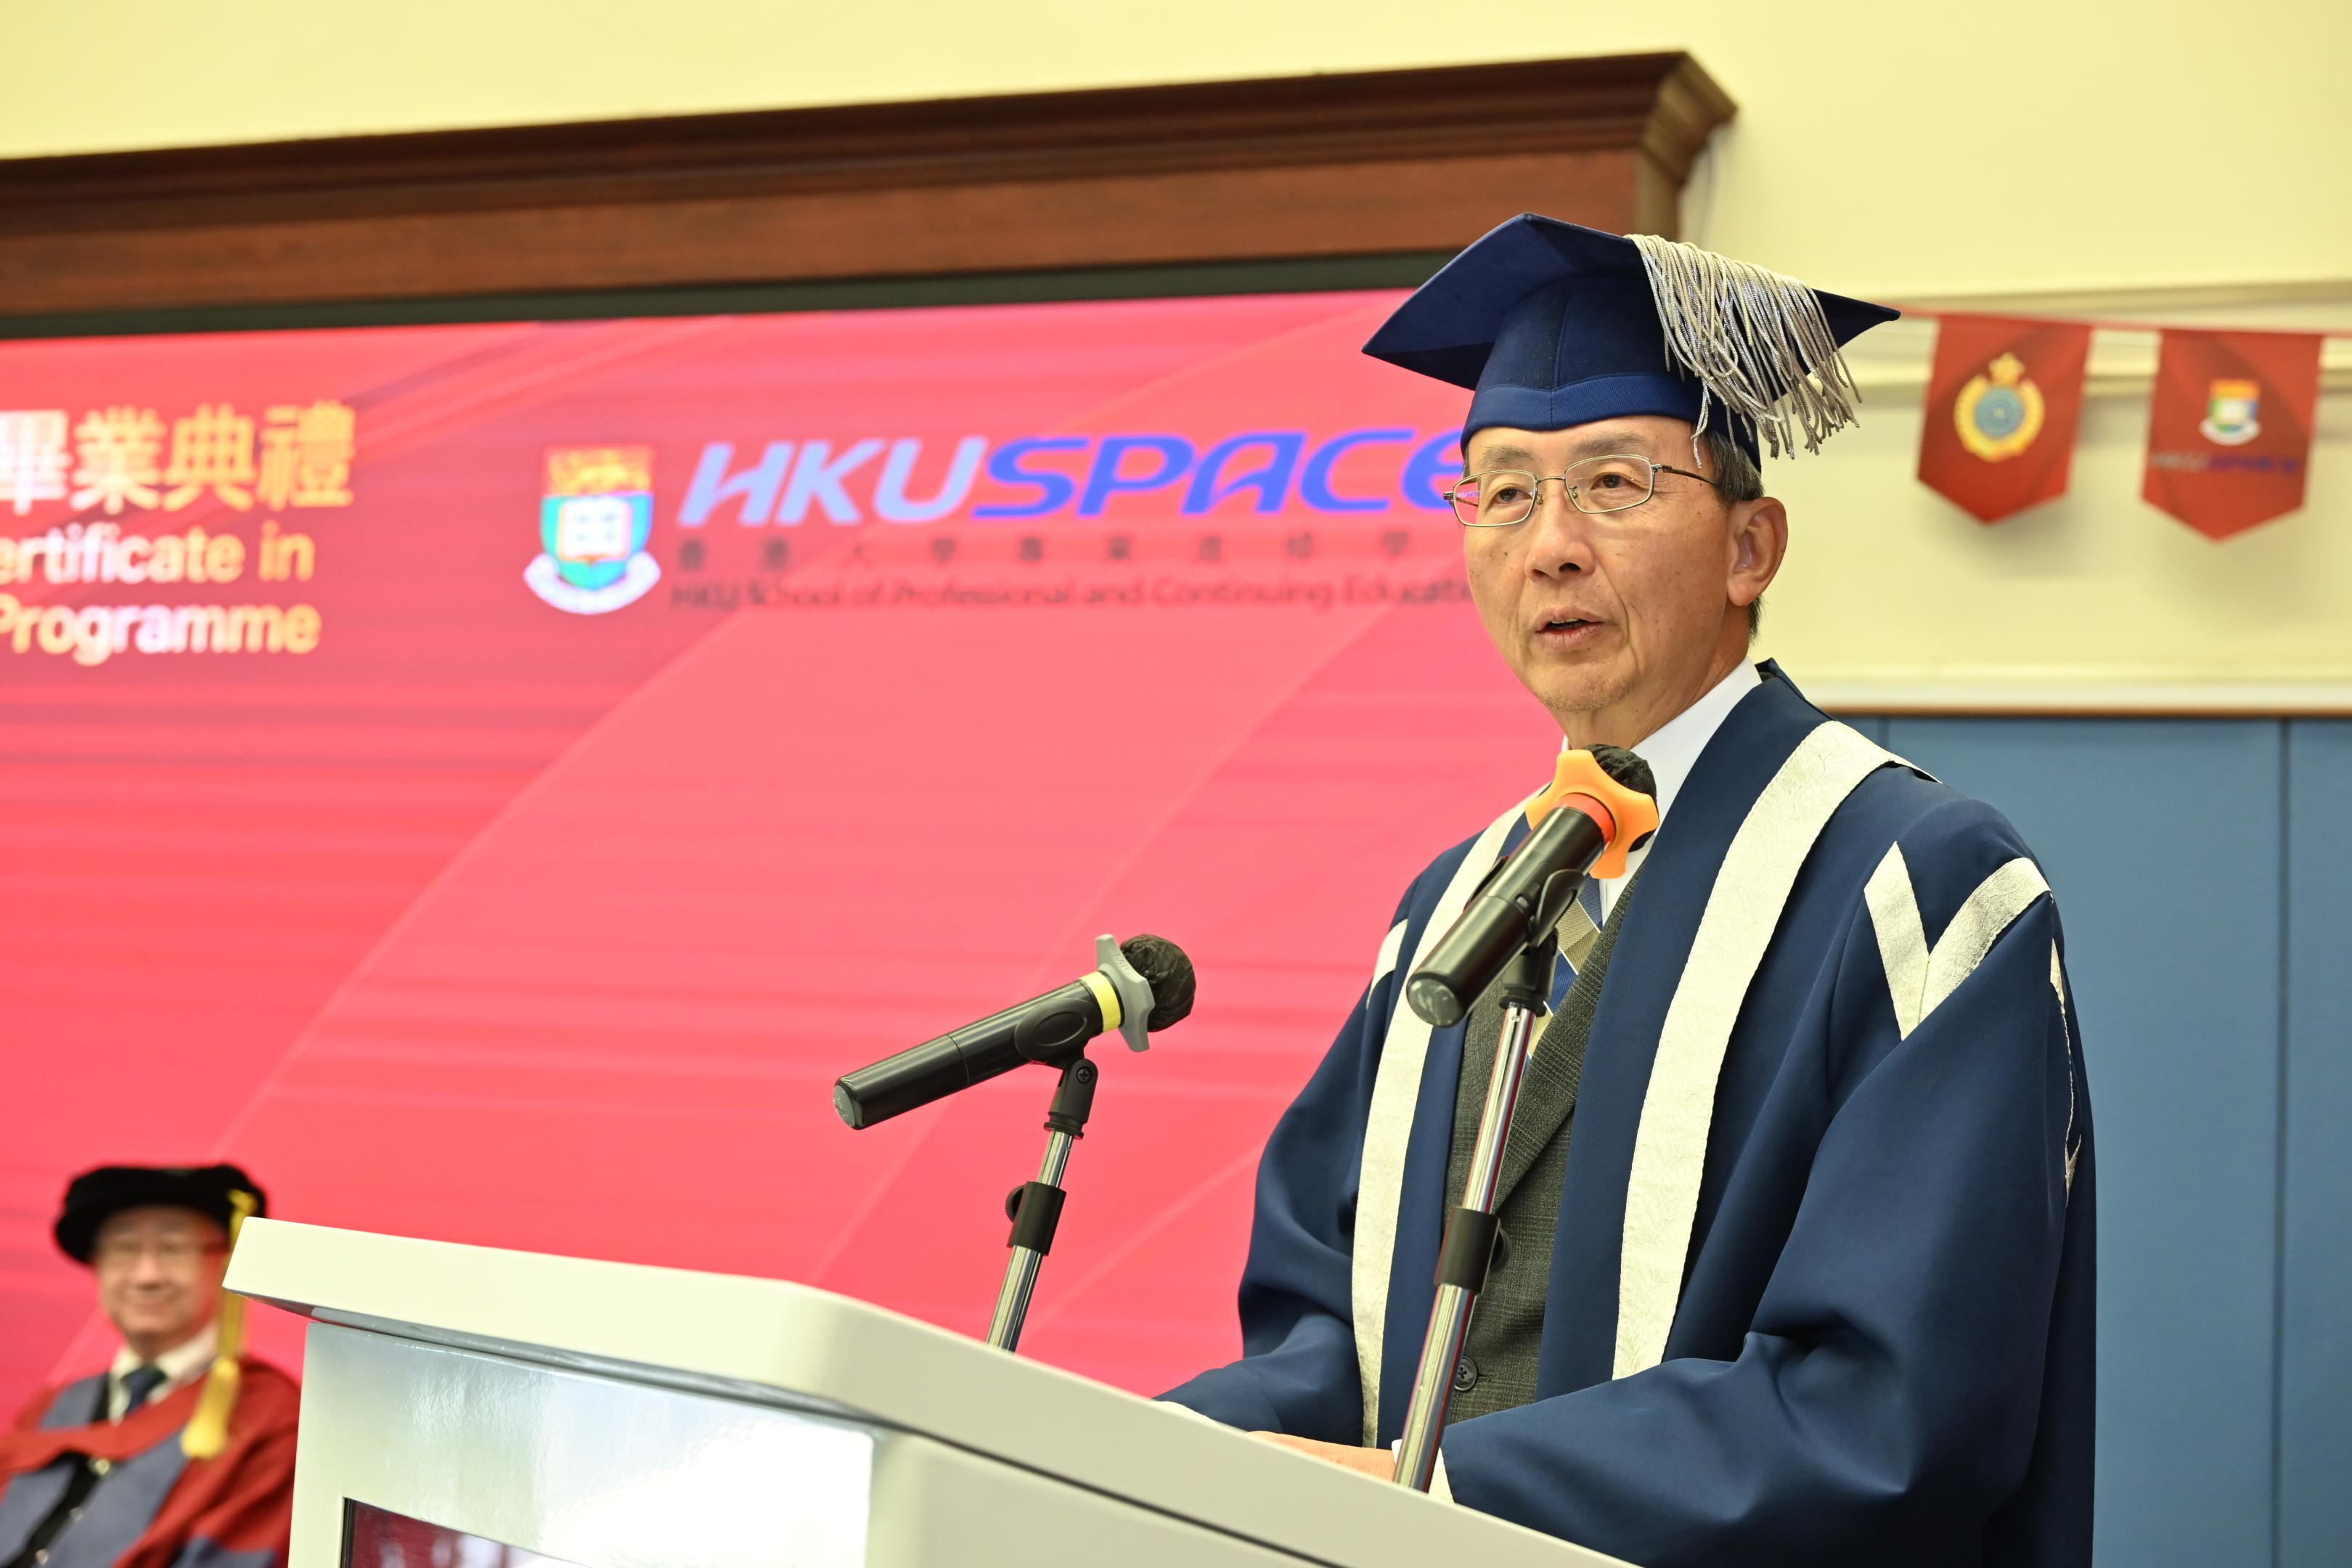 The Correctional Services Department held the first graduation ceremony of the Postgraduate Certificate in Correctional Governance and Leadership Programme at the Hong Kong Correctional Services Academy today (February 22). Photo shows the Director of the School of Professional and Continuing Education of the University of Hong Kong, Professor William Lee, delivering a speech at the ceremony.